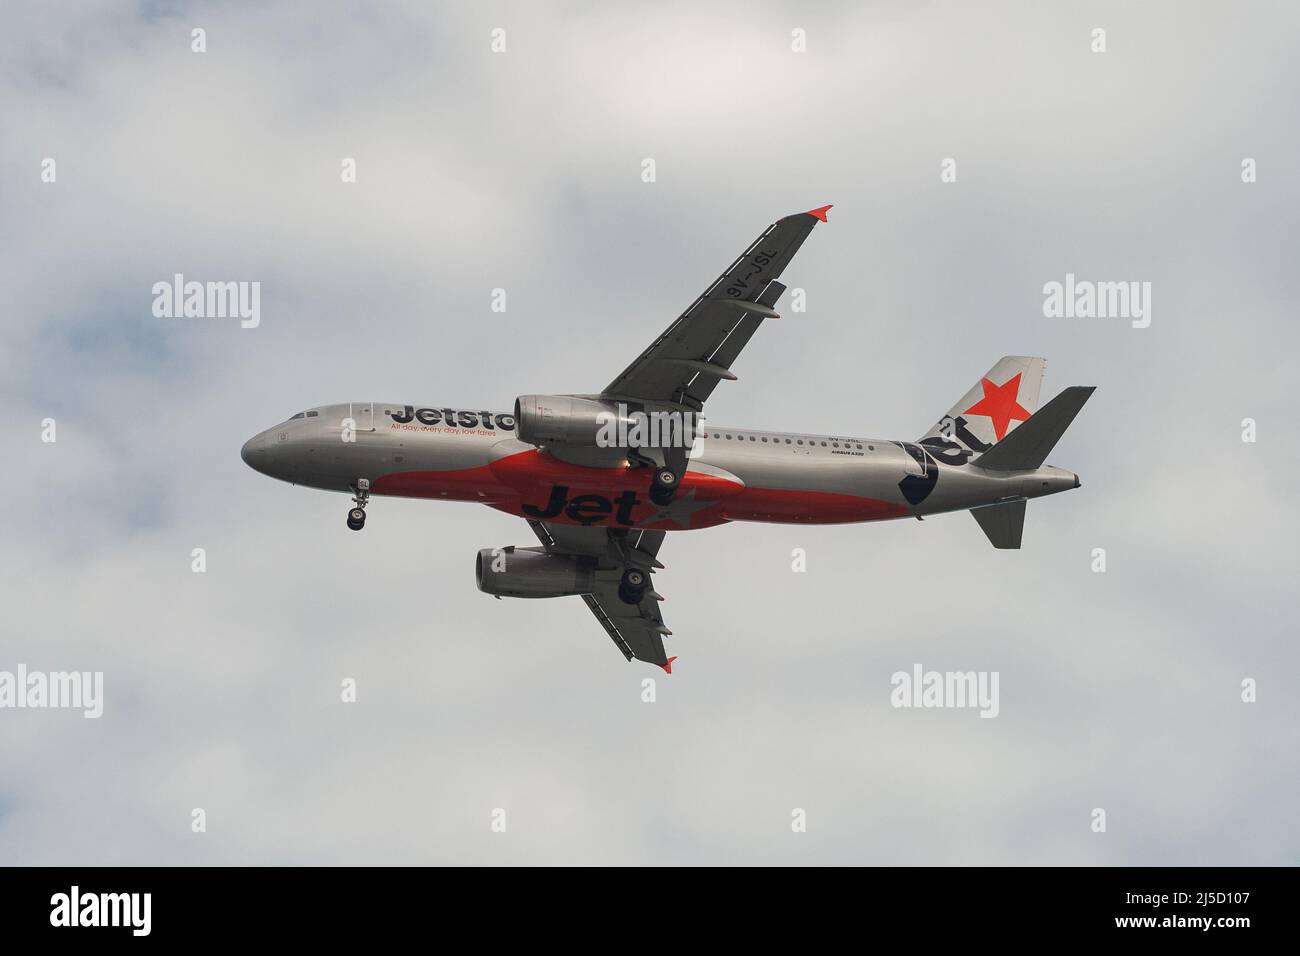 Mar. 26, 2021, Singapore, Republic of Singapore, Asia - A Jetstar Asia Airways Airbus A320-232 passenger aircraft with registration 9V-JSL on approach to Changi International Airport during the ongoing Corona crisis. Jetstar Asia Airways Pte Ltd is a low-cost airline based and headquartered in Singapore. [automated translation] Stock Photo